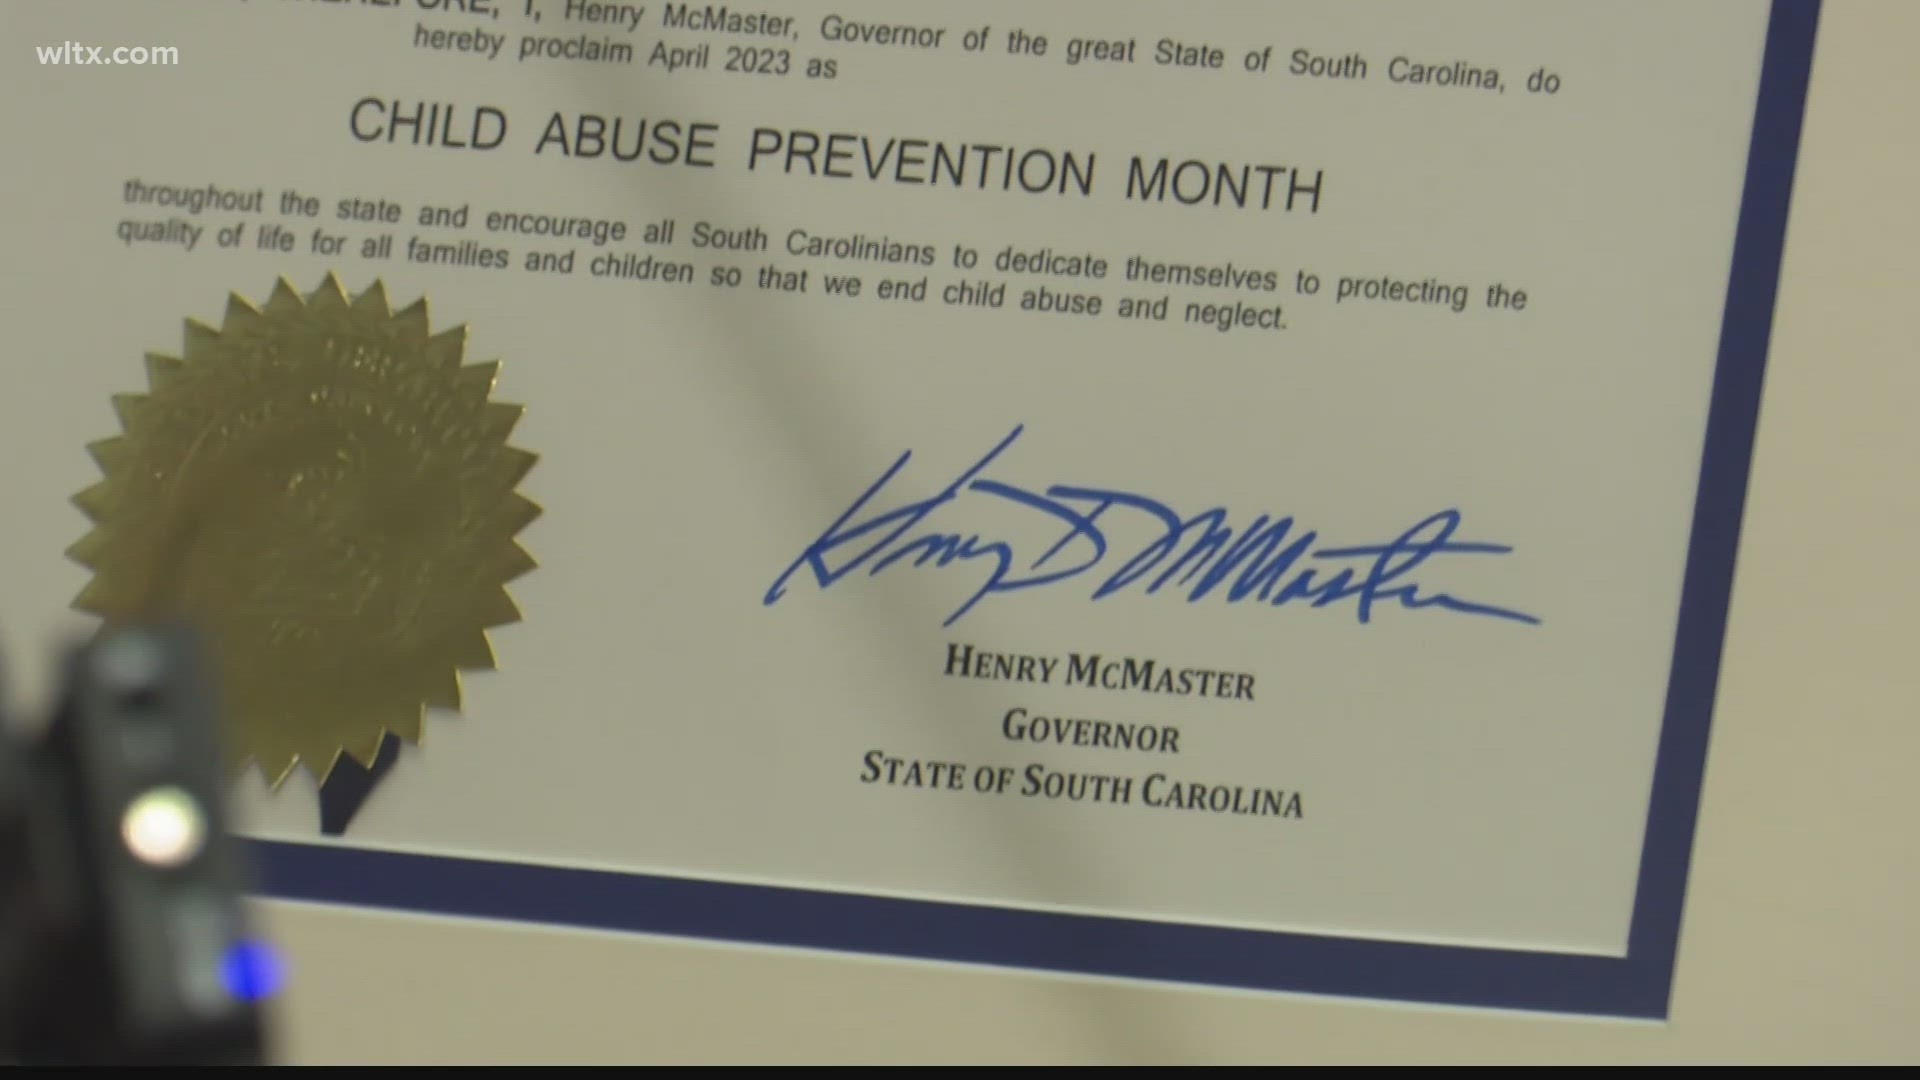 South Carolina ranks 39th in the country for child well-being.